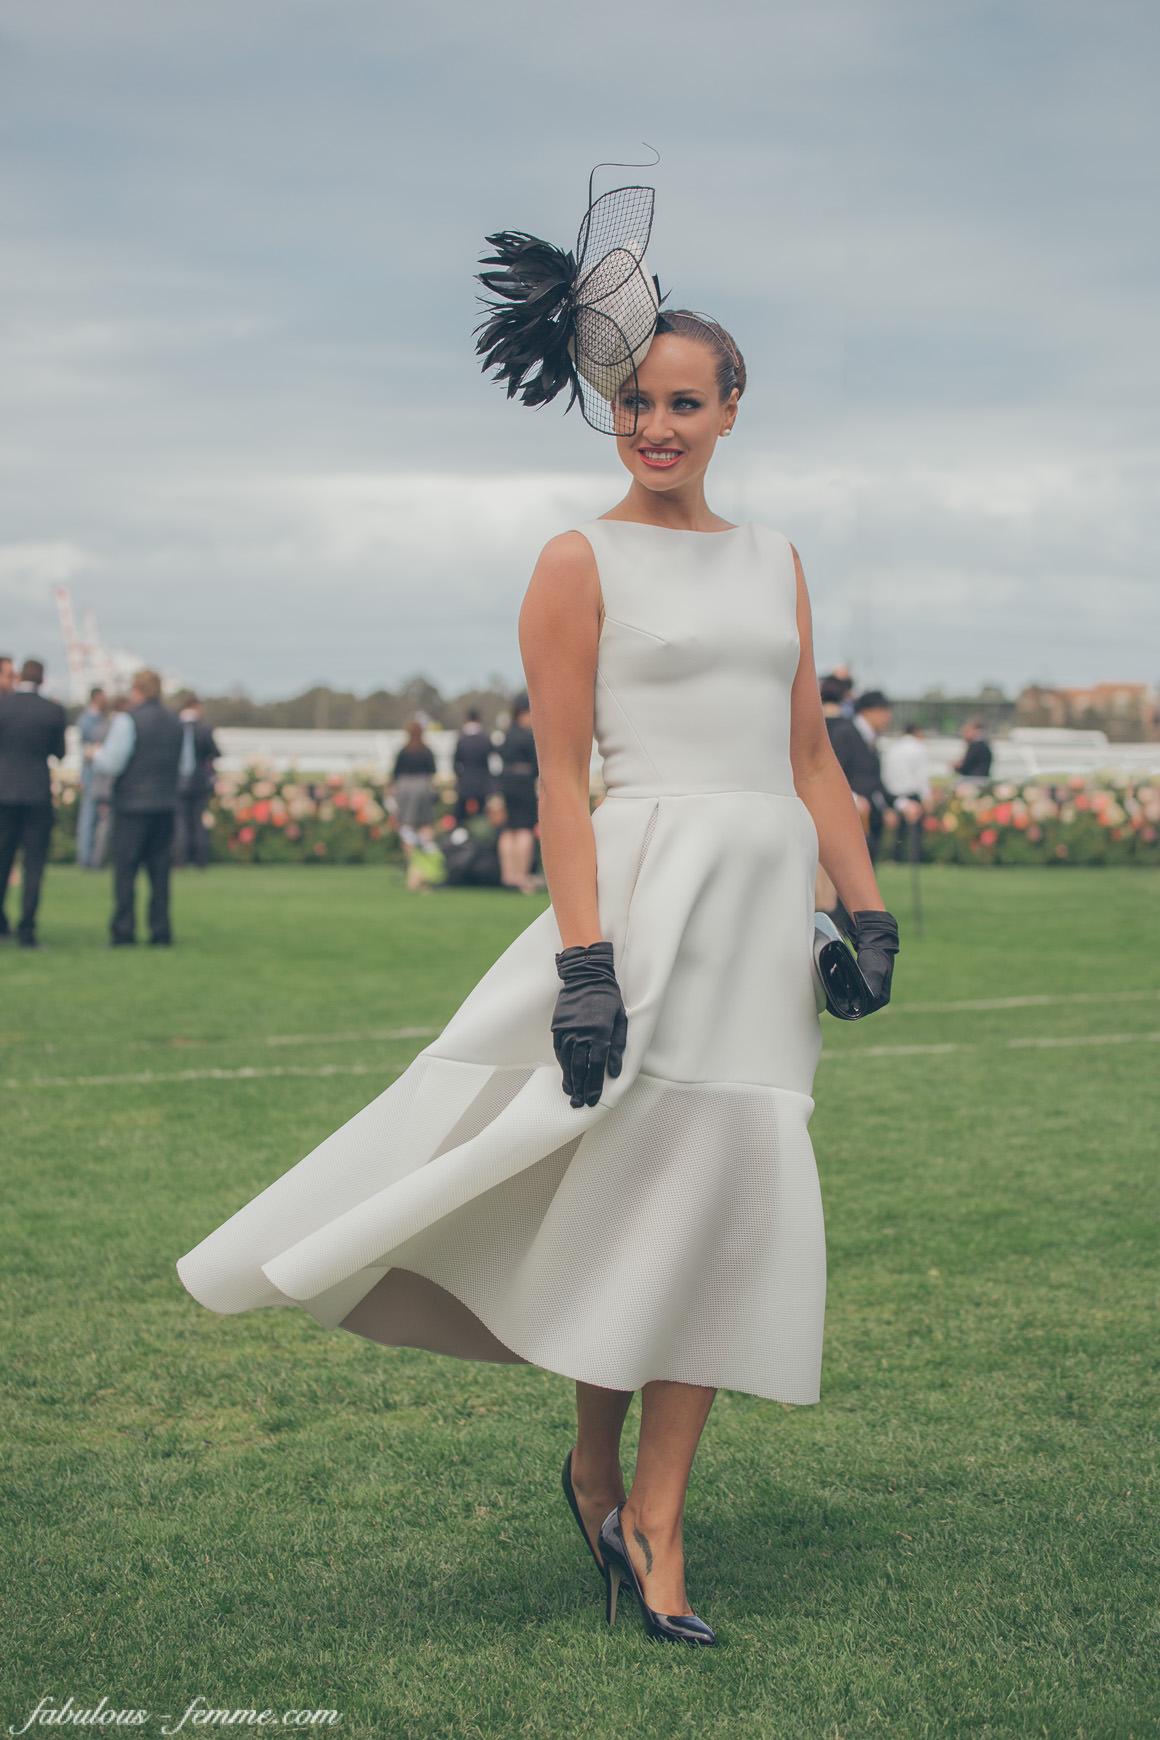 2014 winner of the Fashions on the Field - Oaks Day Victorian Finals - National Final 